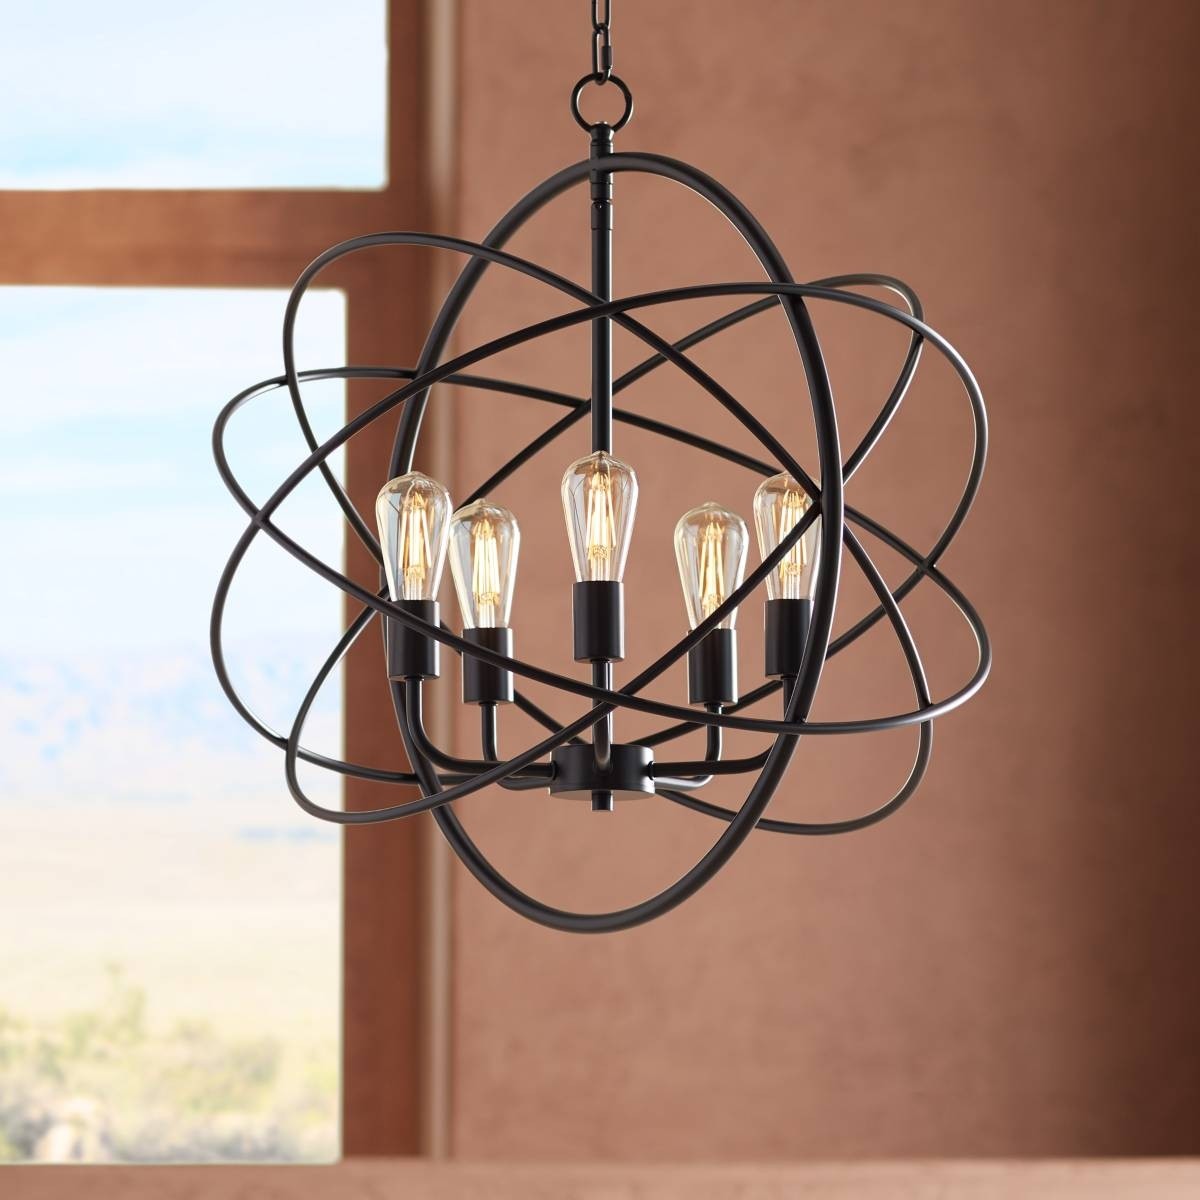 Entry chandeliers upscale entryway chandelier designs